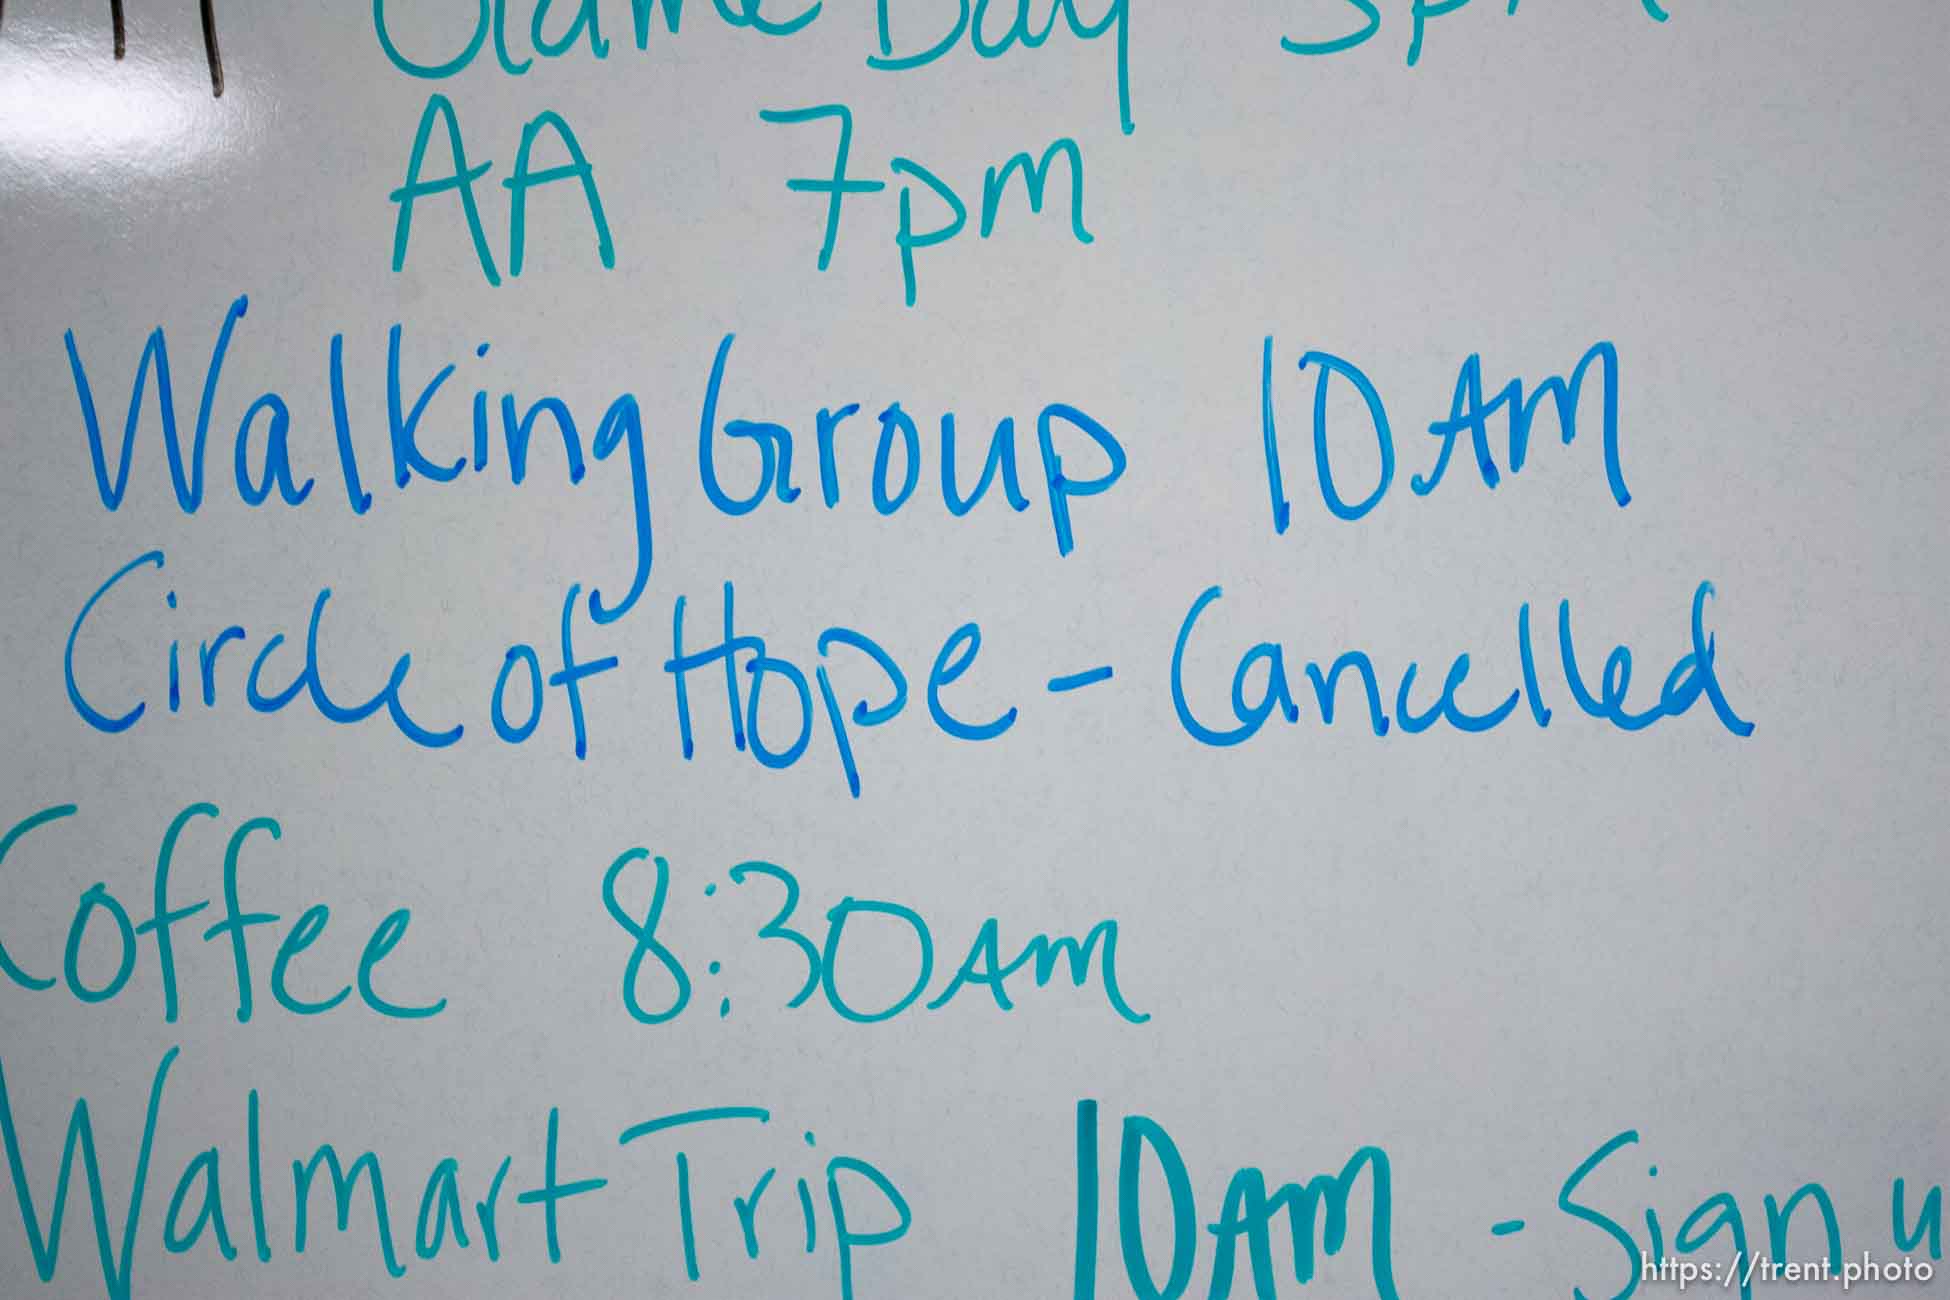 Circle of Hope – Cancelled